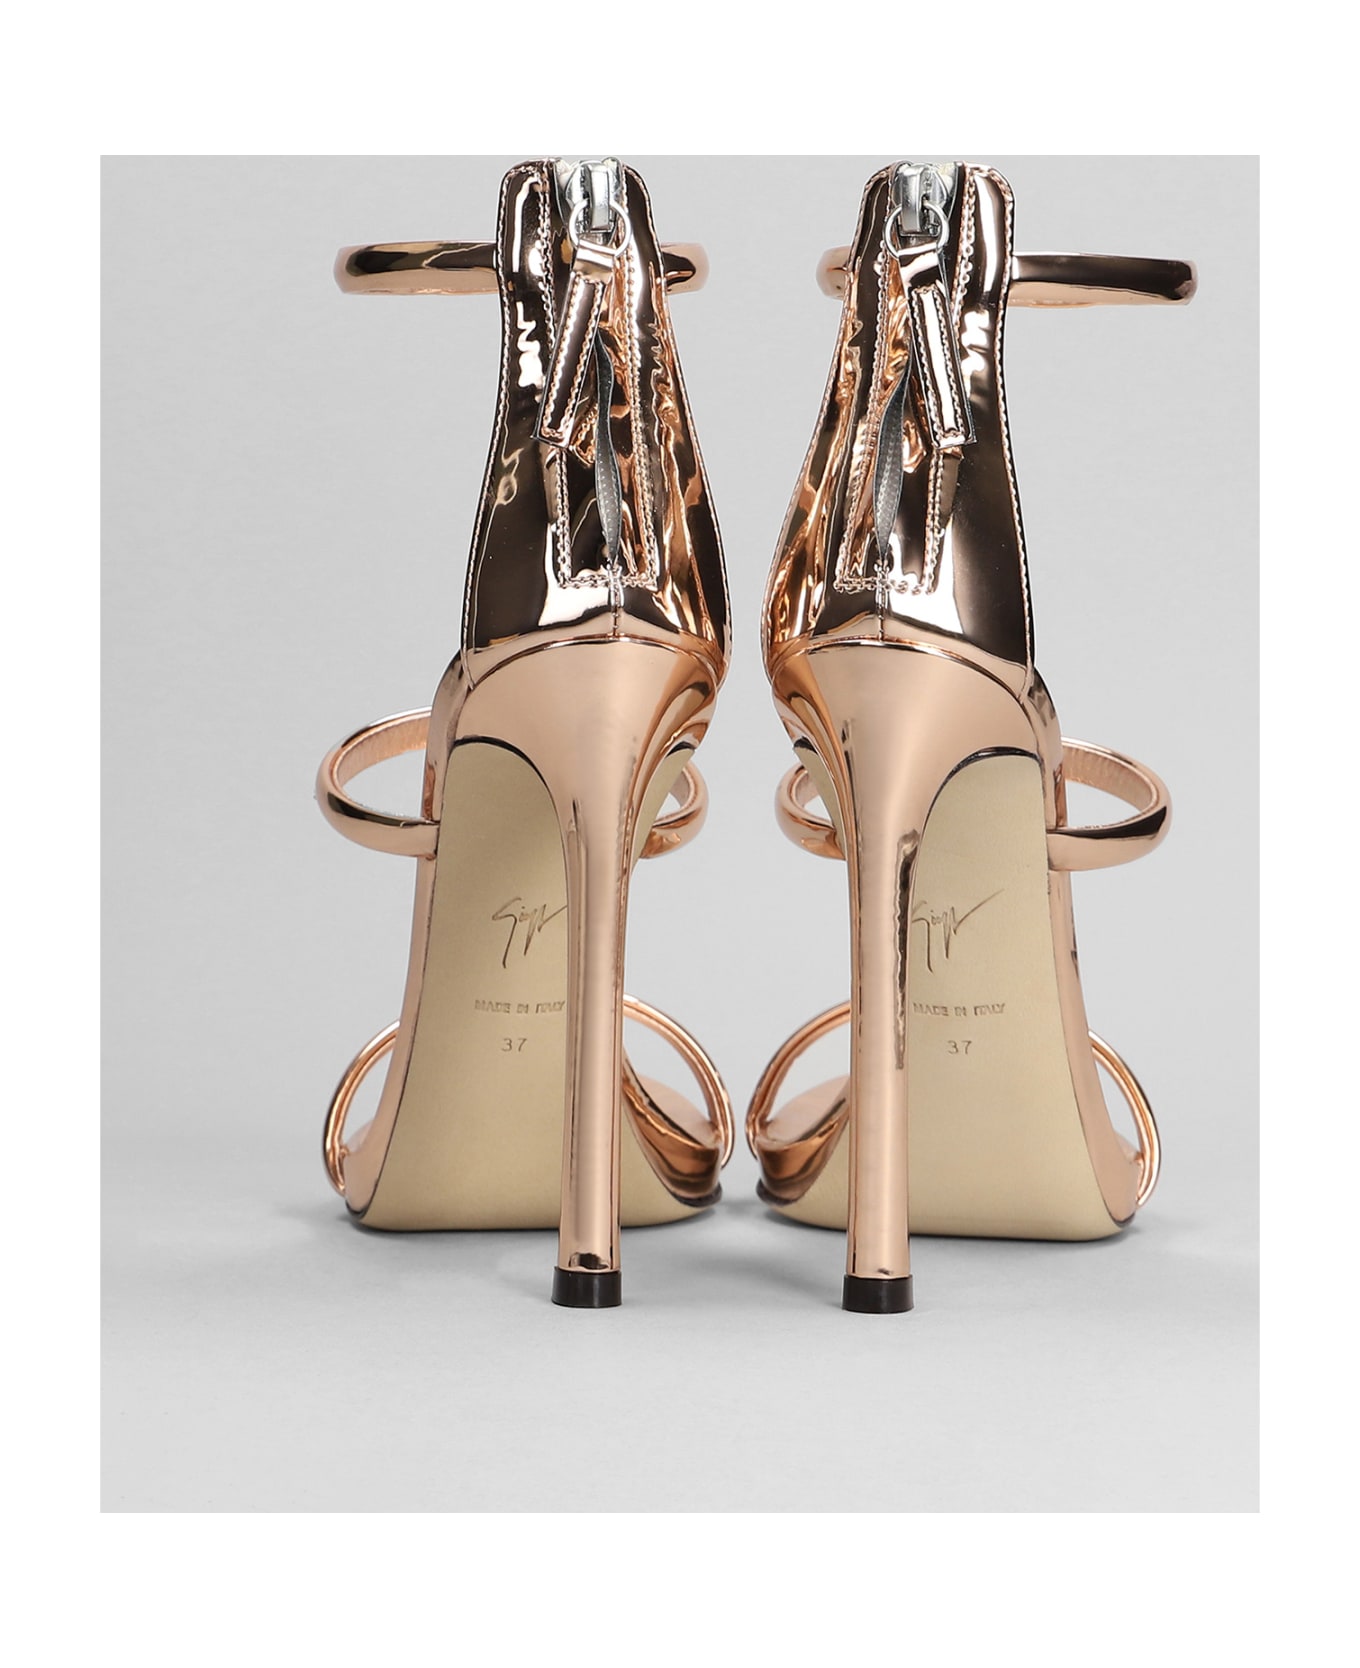 Giuseppe Zanotti Harmony Sandals In Gold Patent Leather - gold